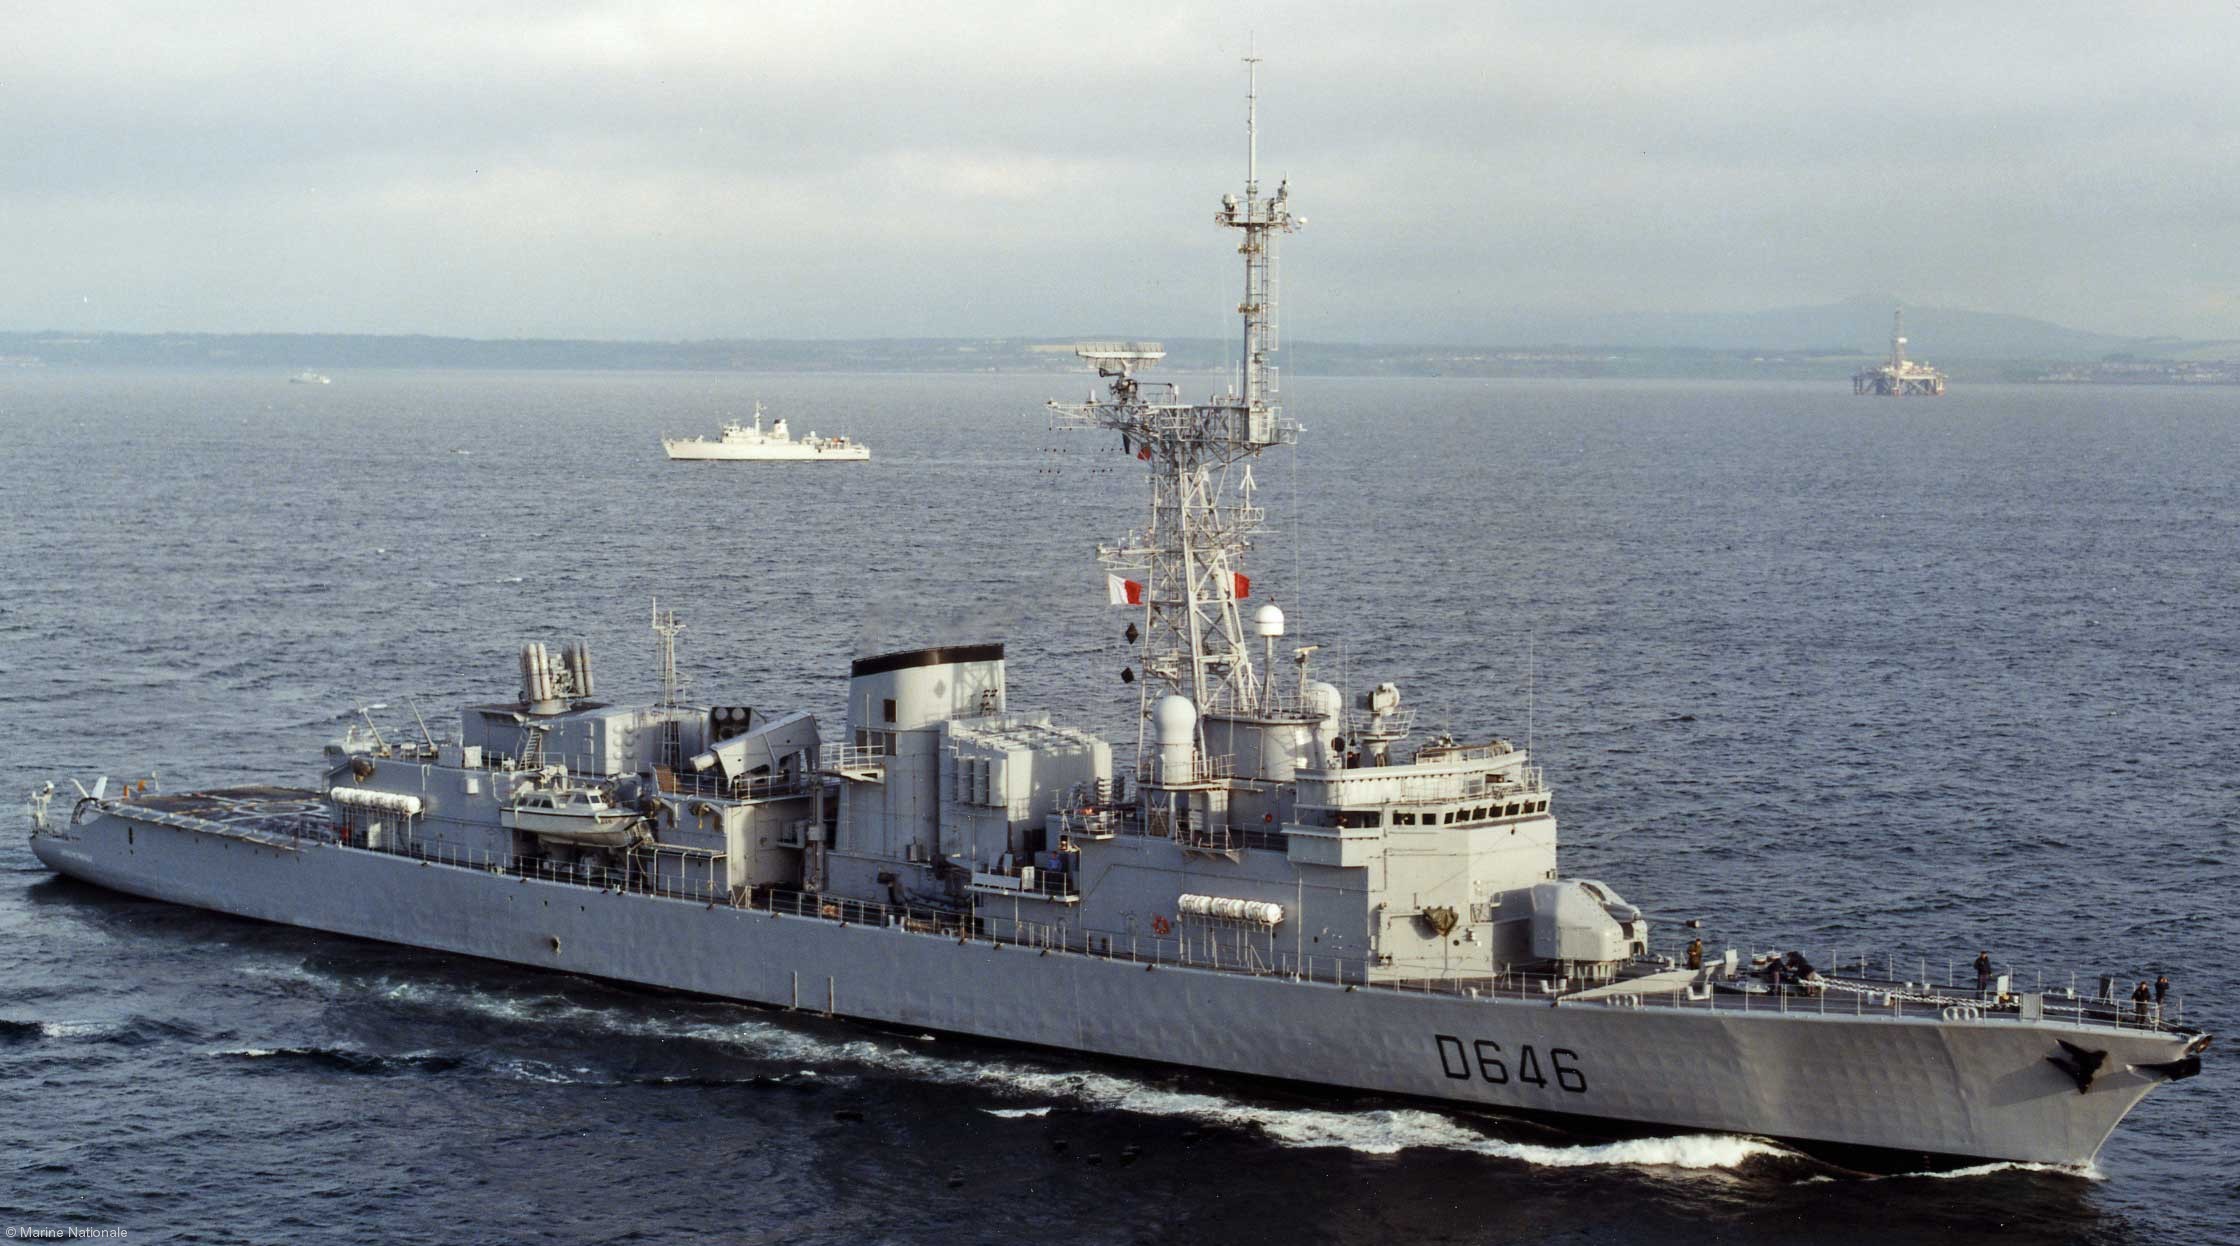 d-646 fs latouche treville f70as frigate destroyer asw french navy marine nationale 08